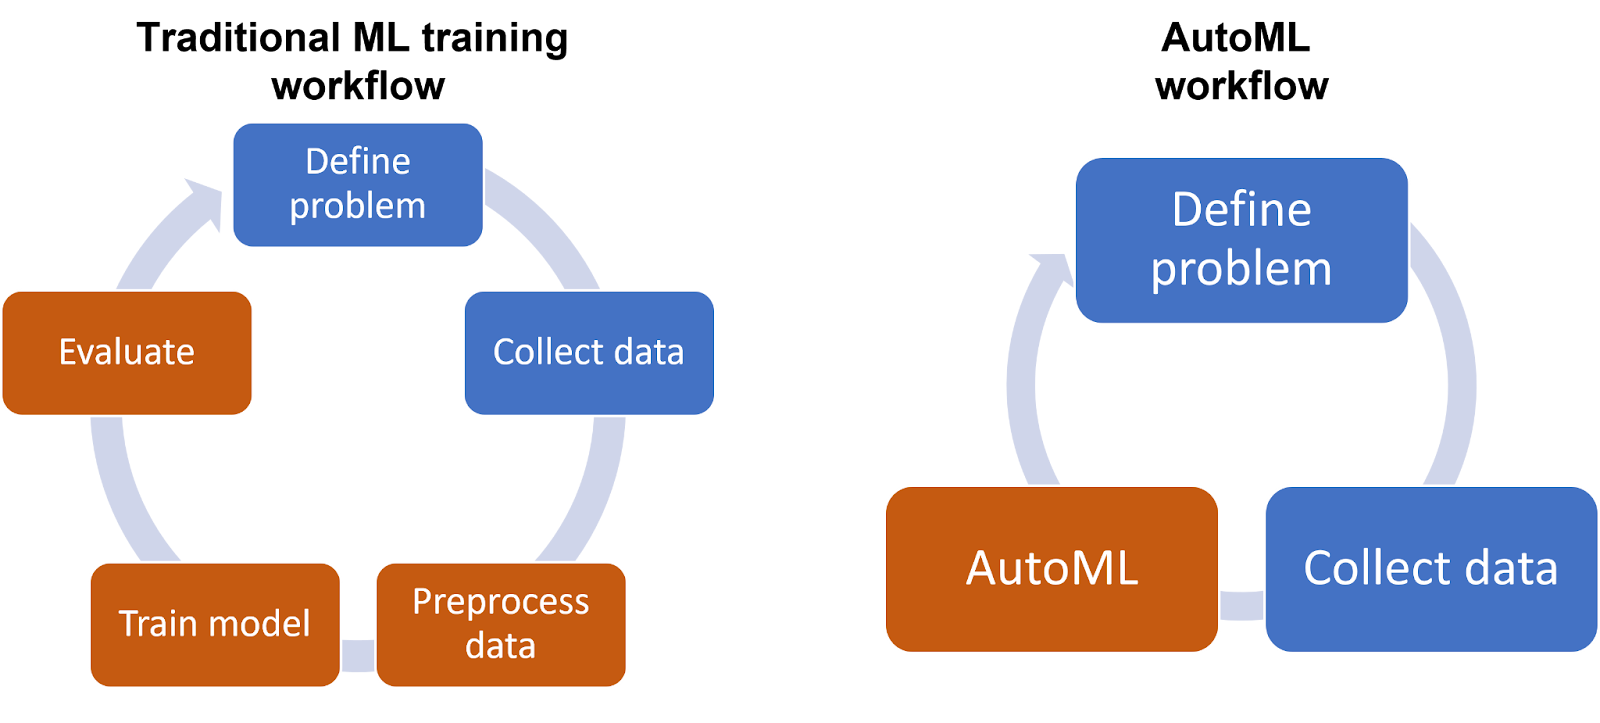 What are the key trends in AutoML, and how are they simplifying machine learning model development? 3